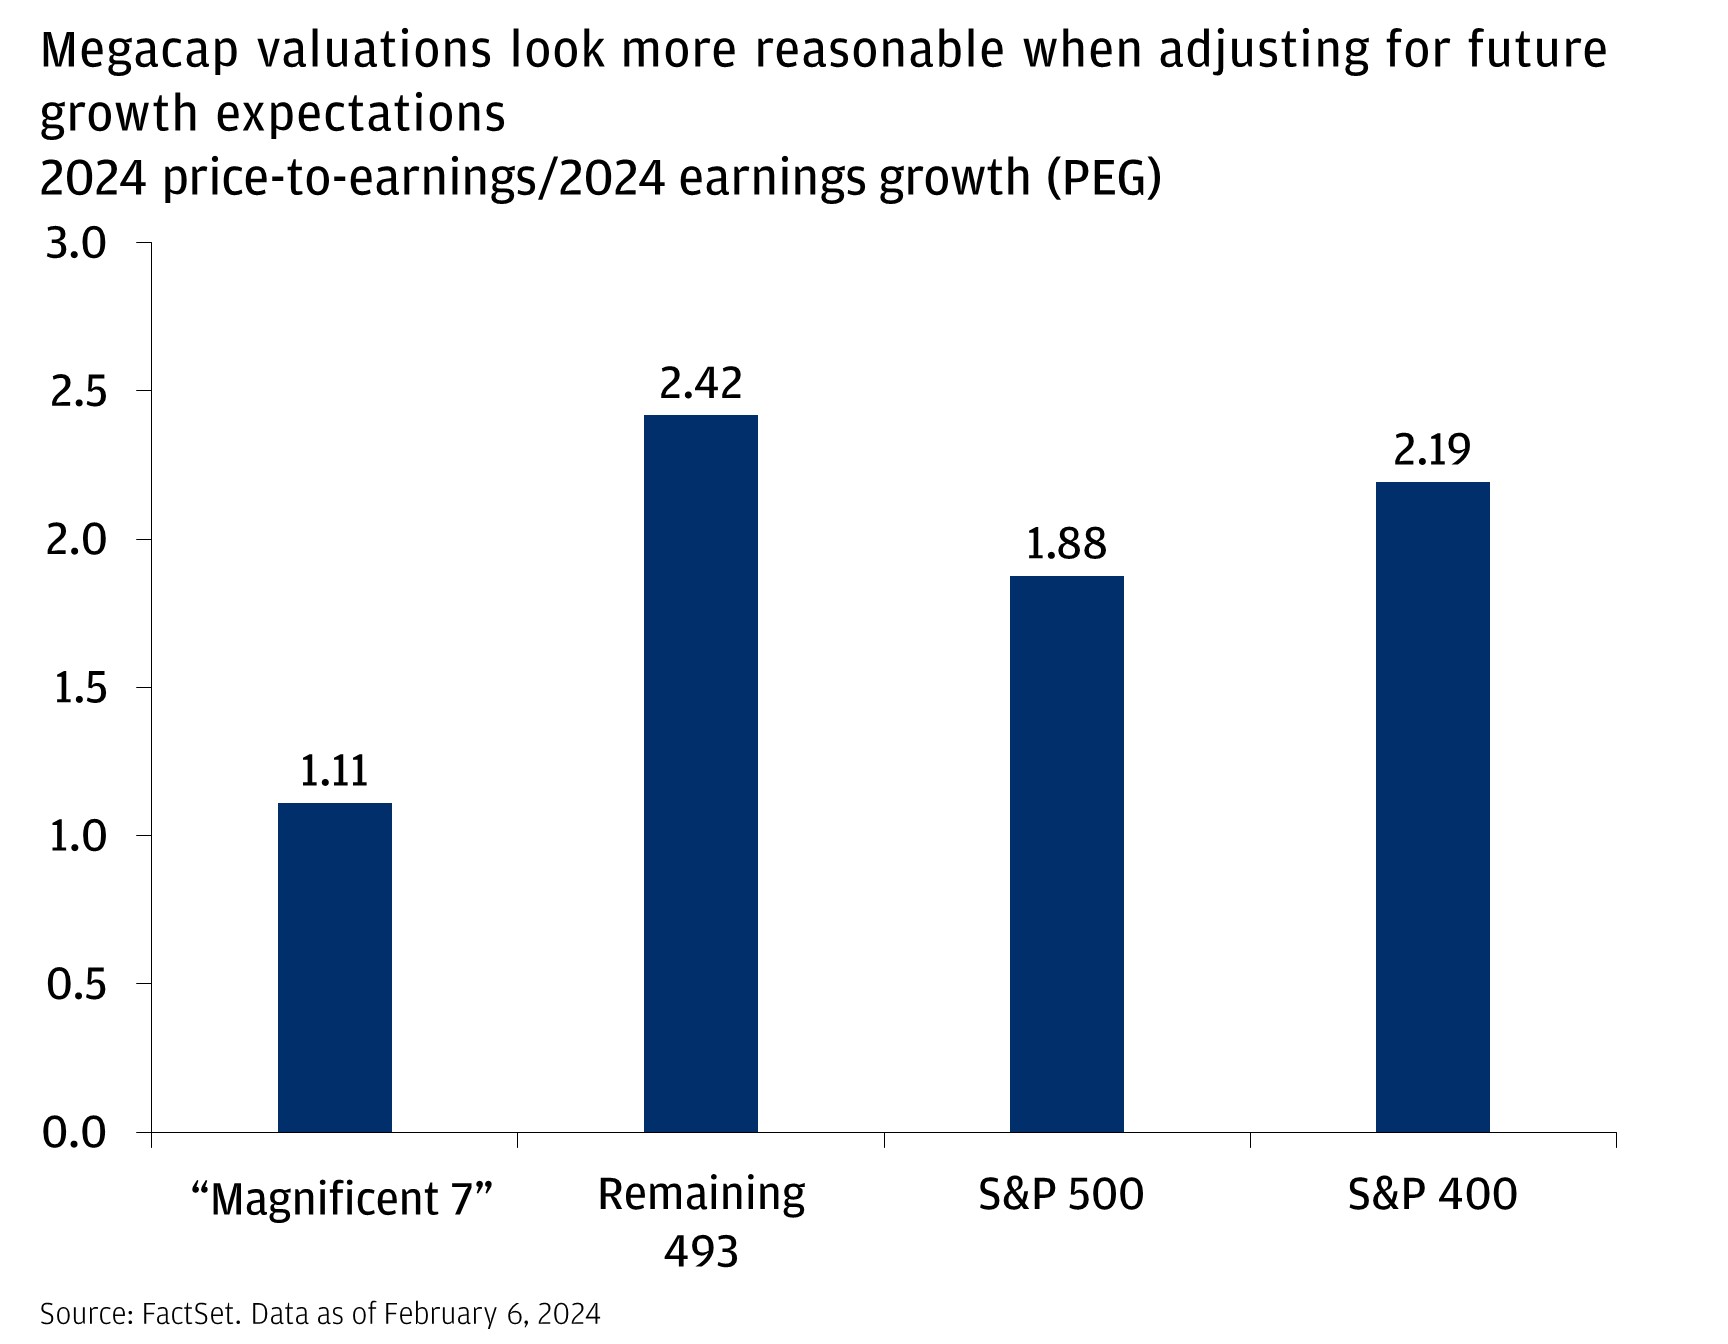 This chart shows 2024 price-to-earnings/2024 earnings growth (PEG) ratio for the Mag-7, remaining 493, S&P 500, and S&P 400., for 2024 and 2025.